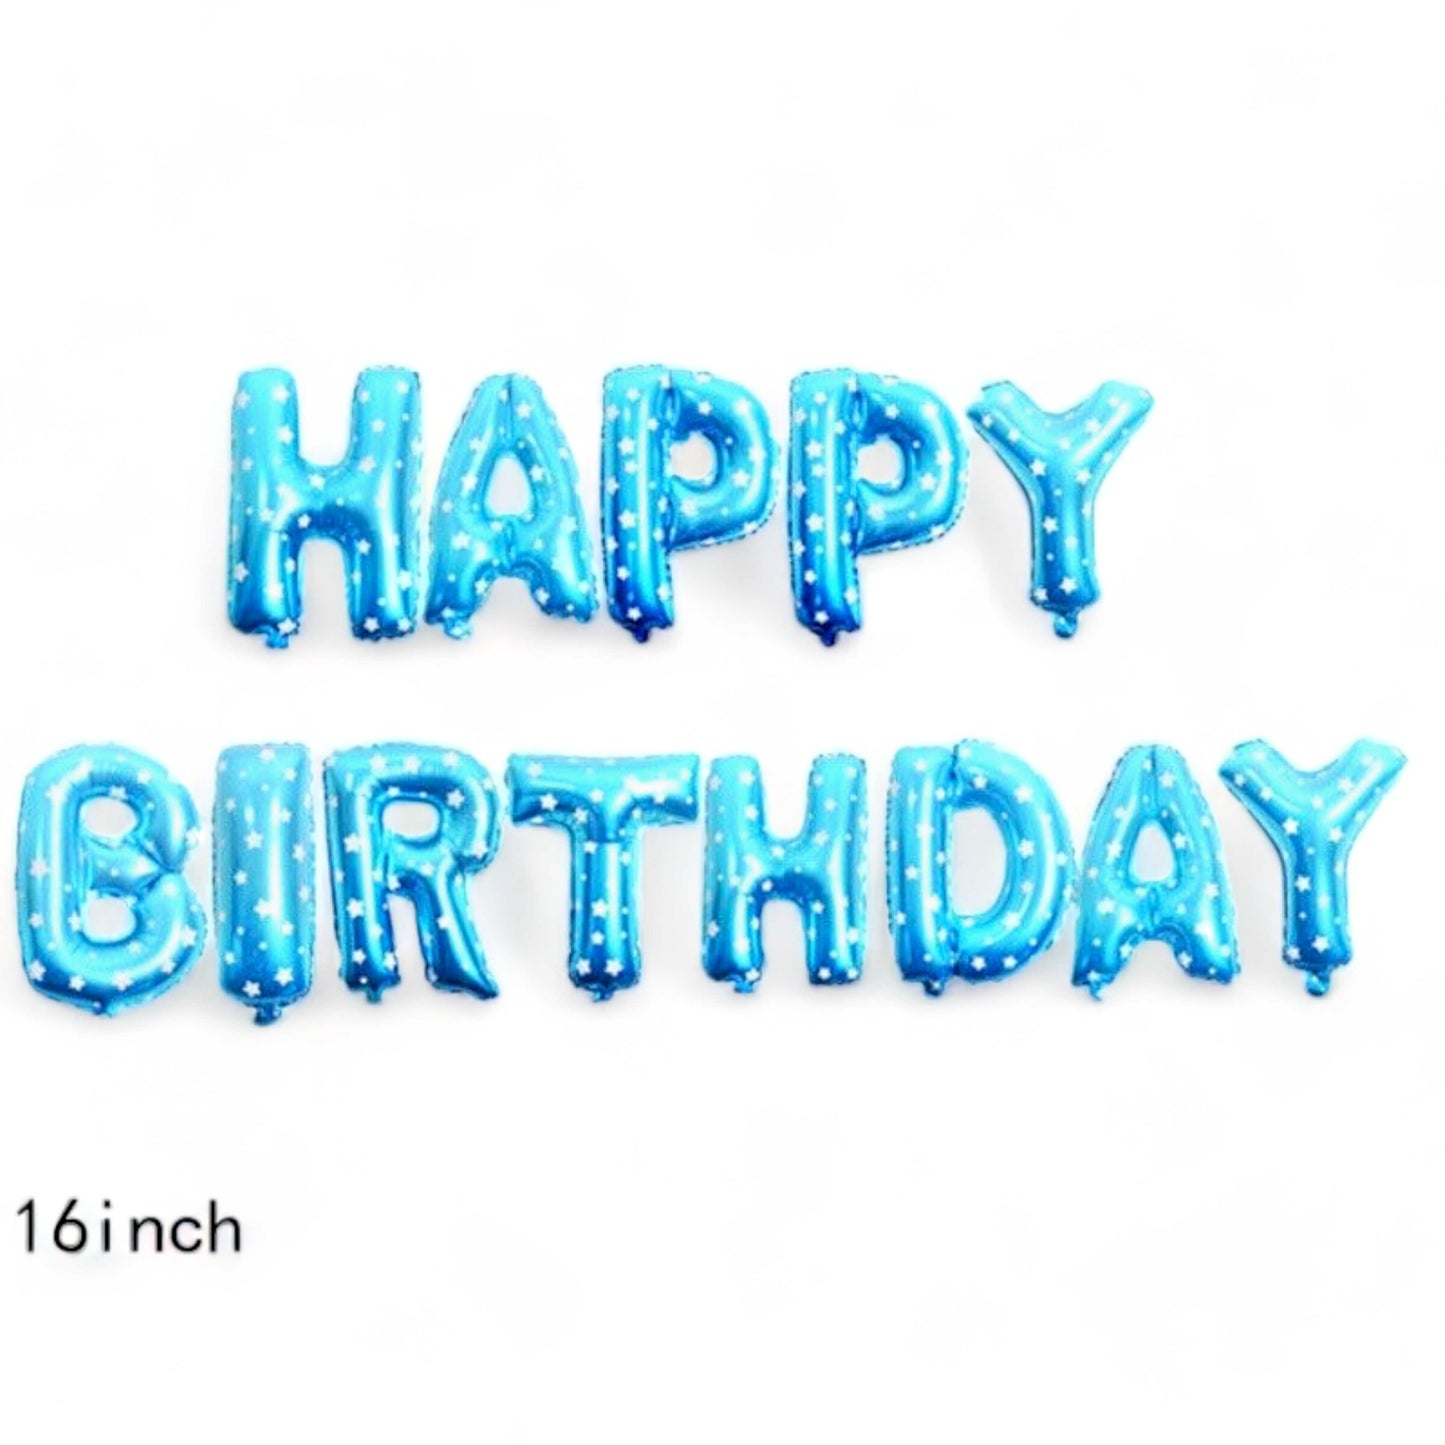 16 Inch Latter Happy Birthday Foil Balloon For Birthday Party Decoration, Party-Room Decor